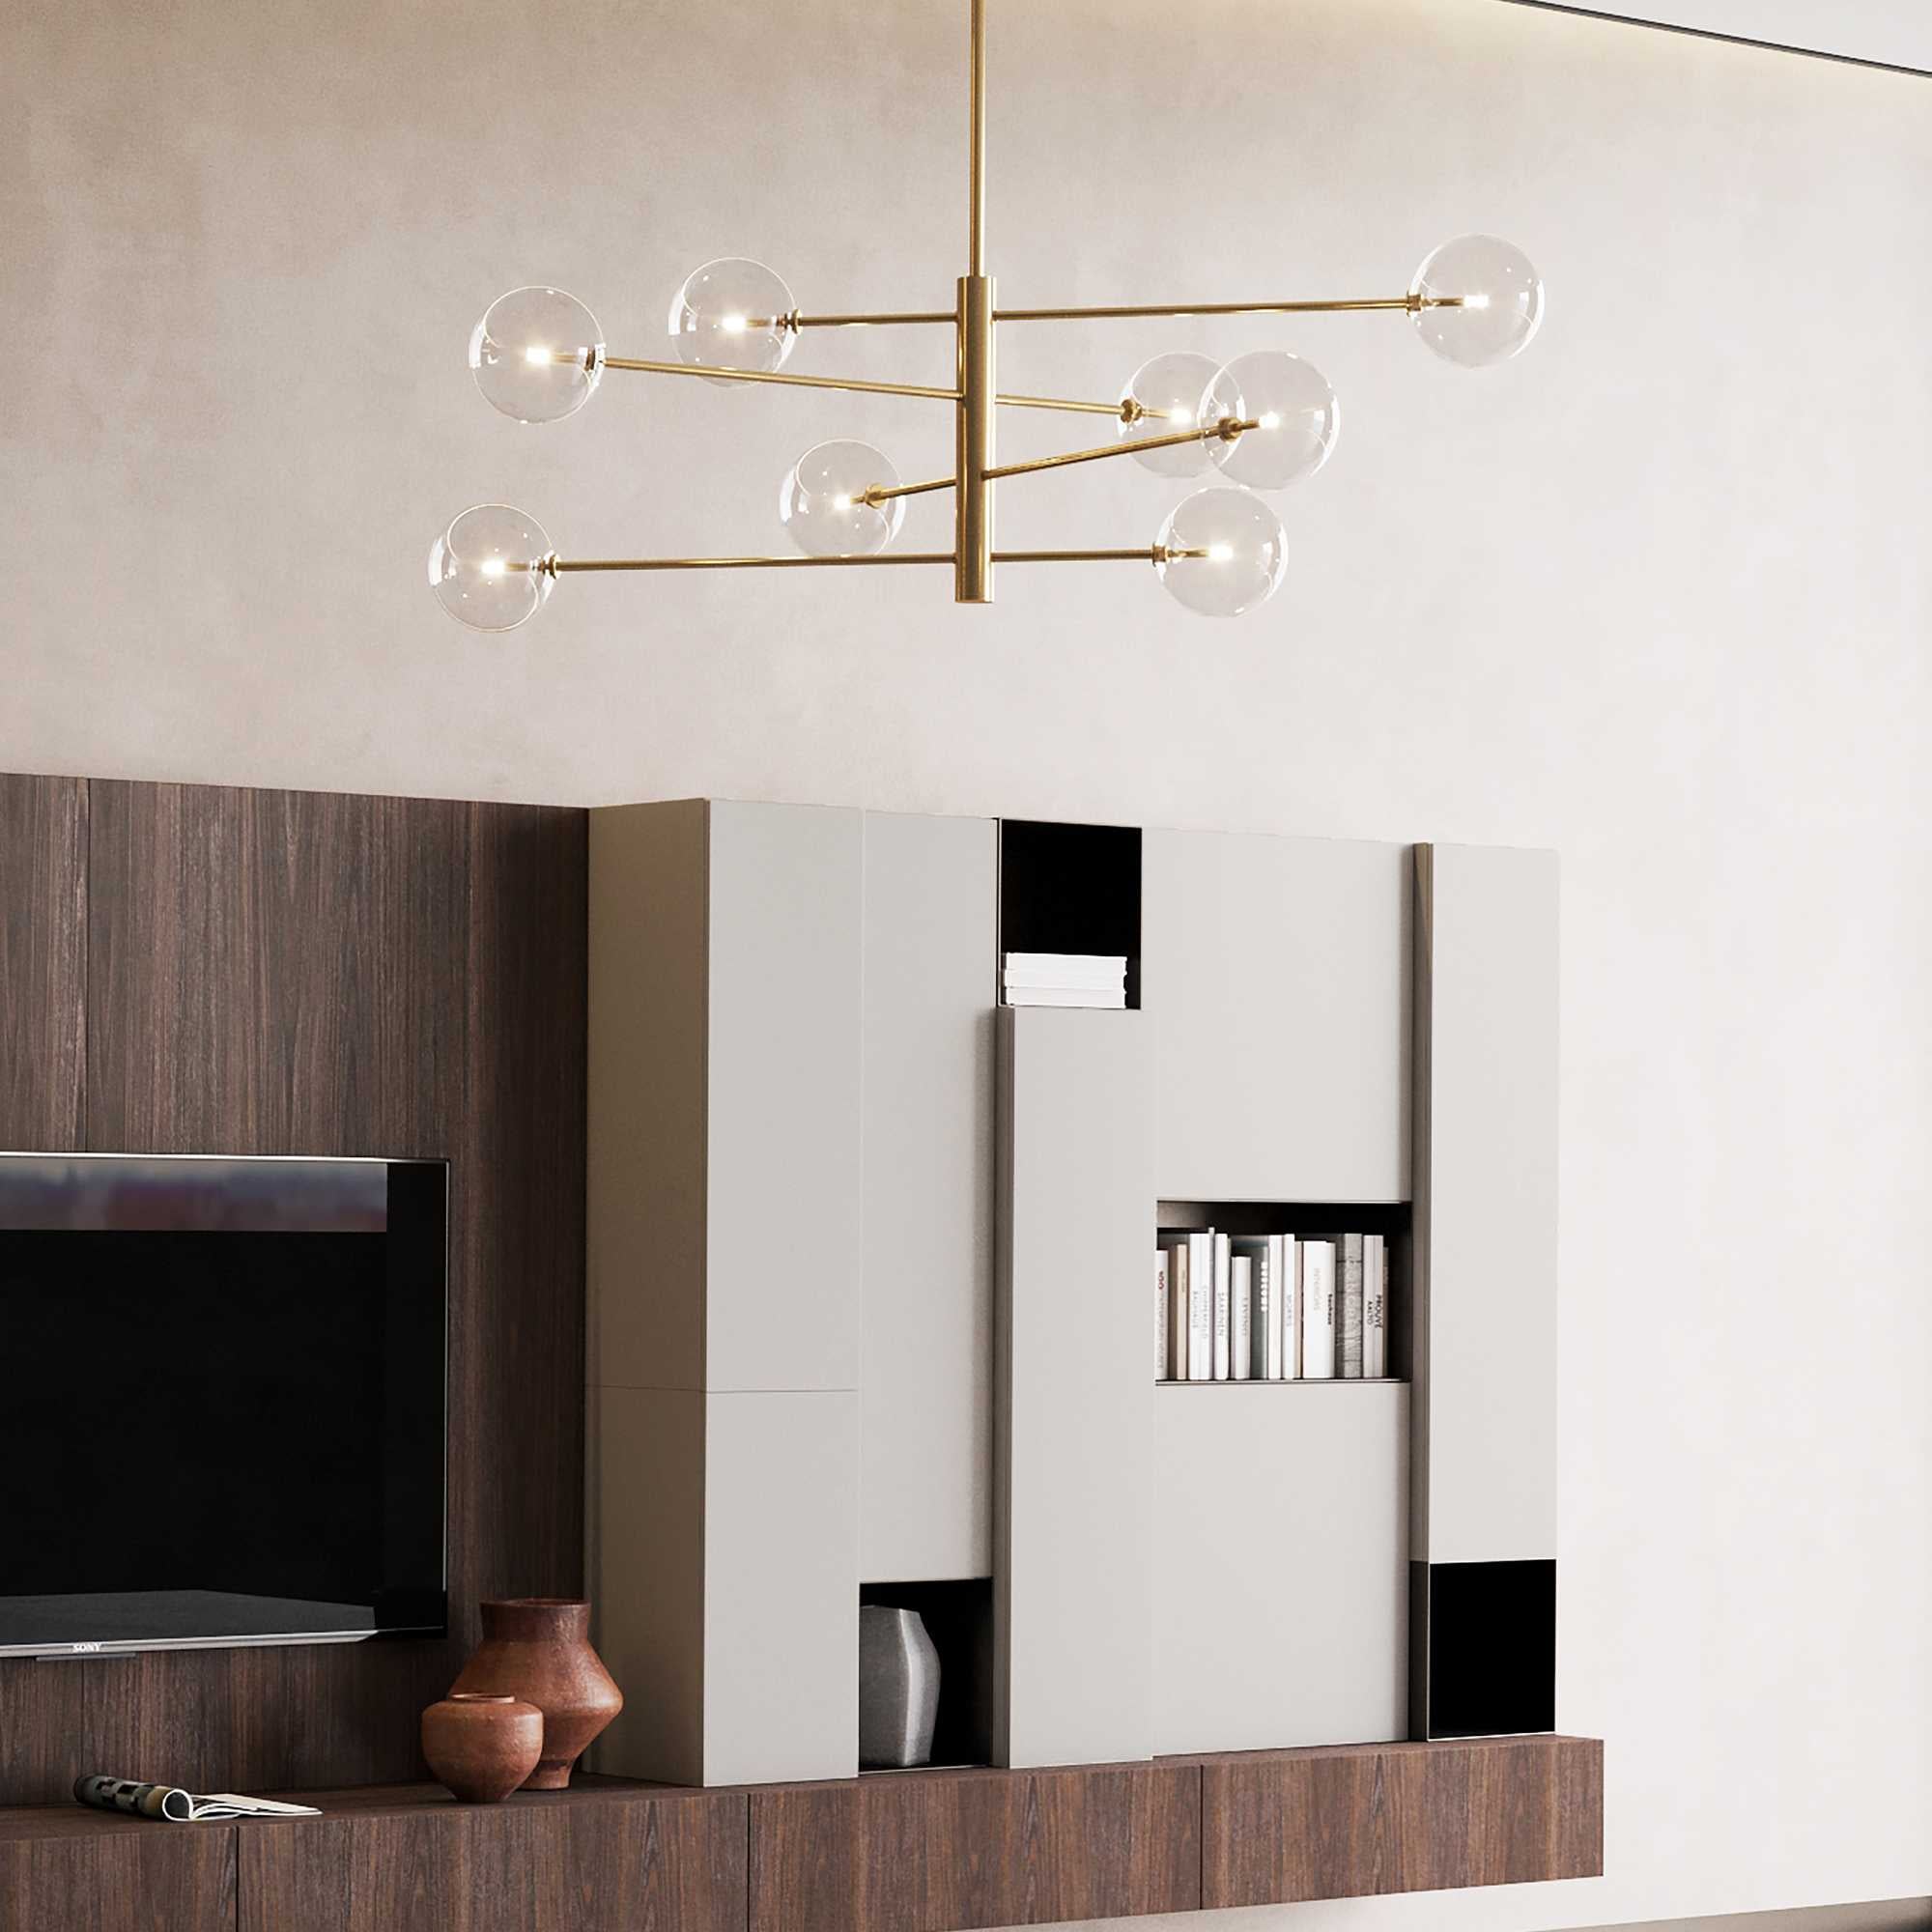 Equinoxe lamp - Ideal Lux